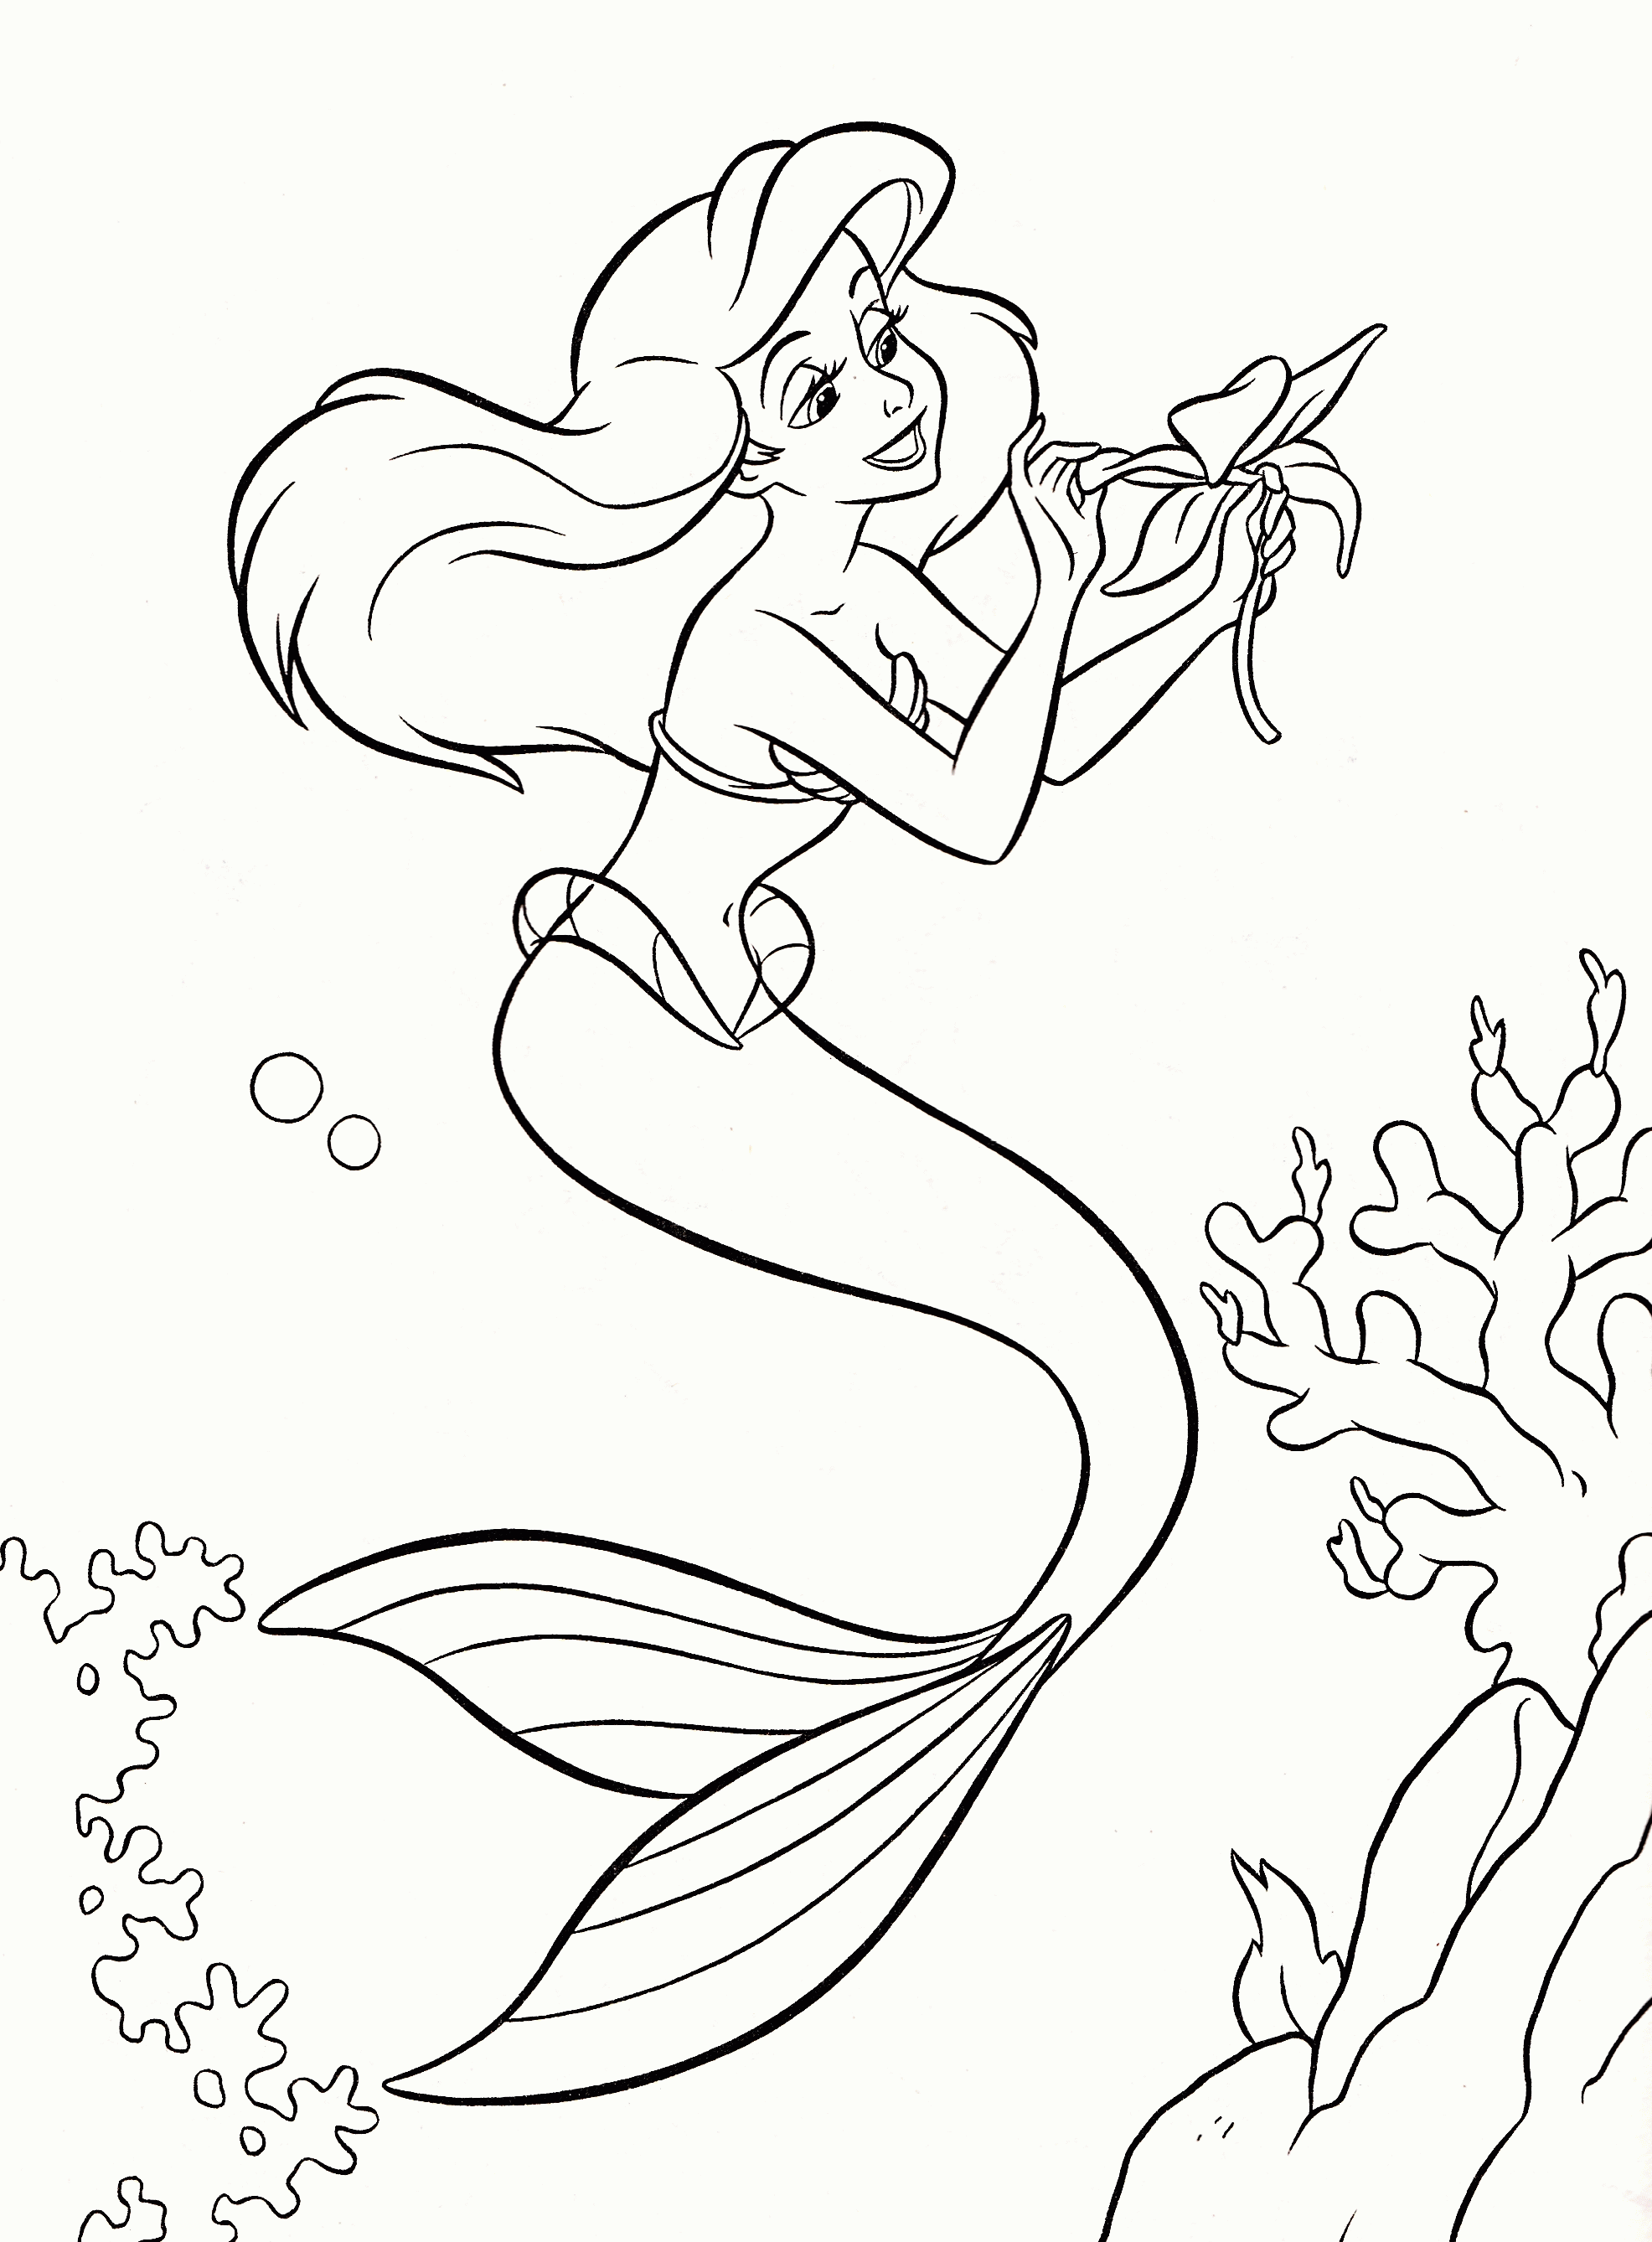 Coloring Book Pages Disney Characters - Coloring